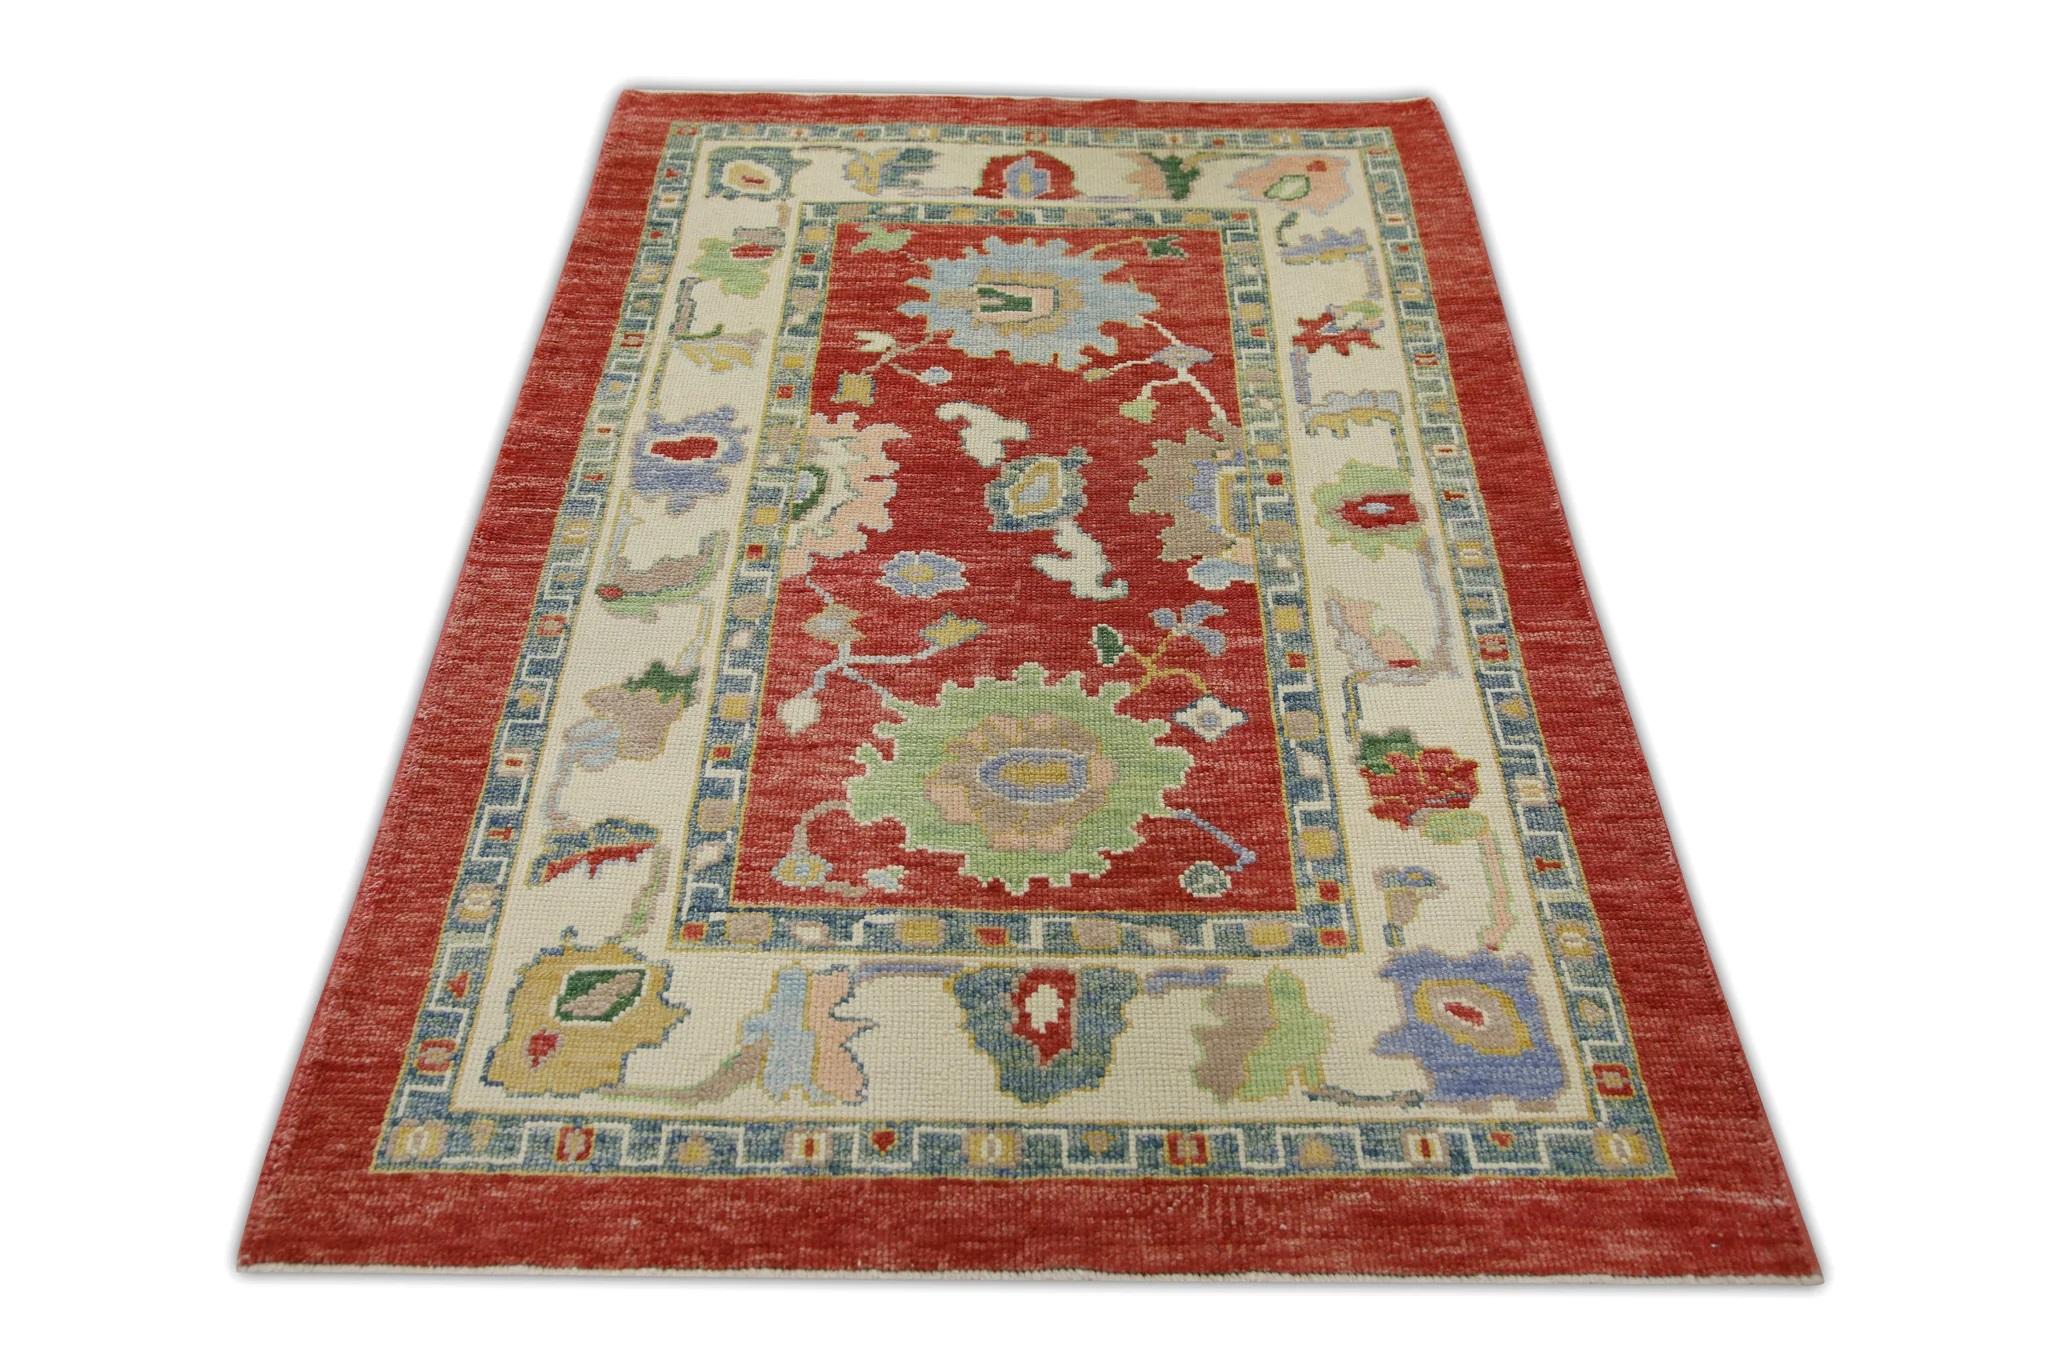 Red Handwoven Wool Turkish Oushak Rug in Blue & Green Floral Design 4'3